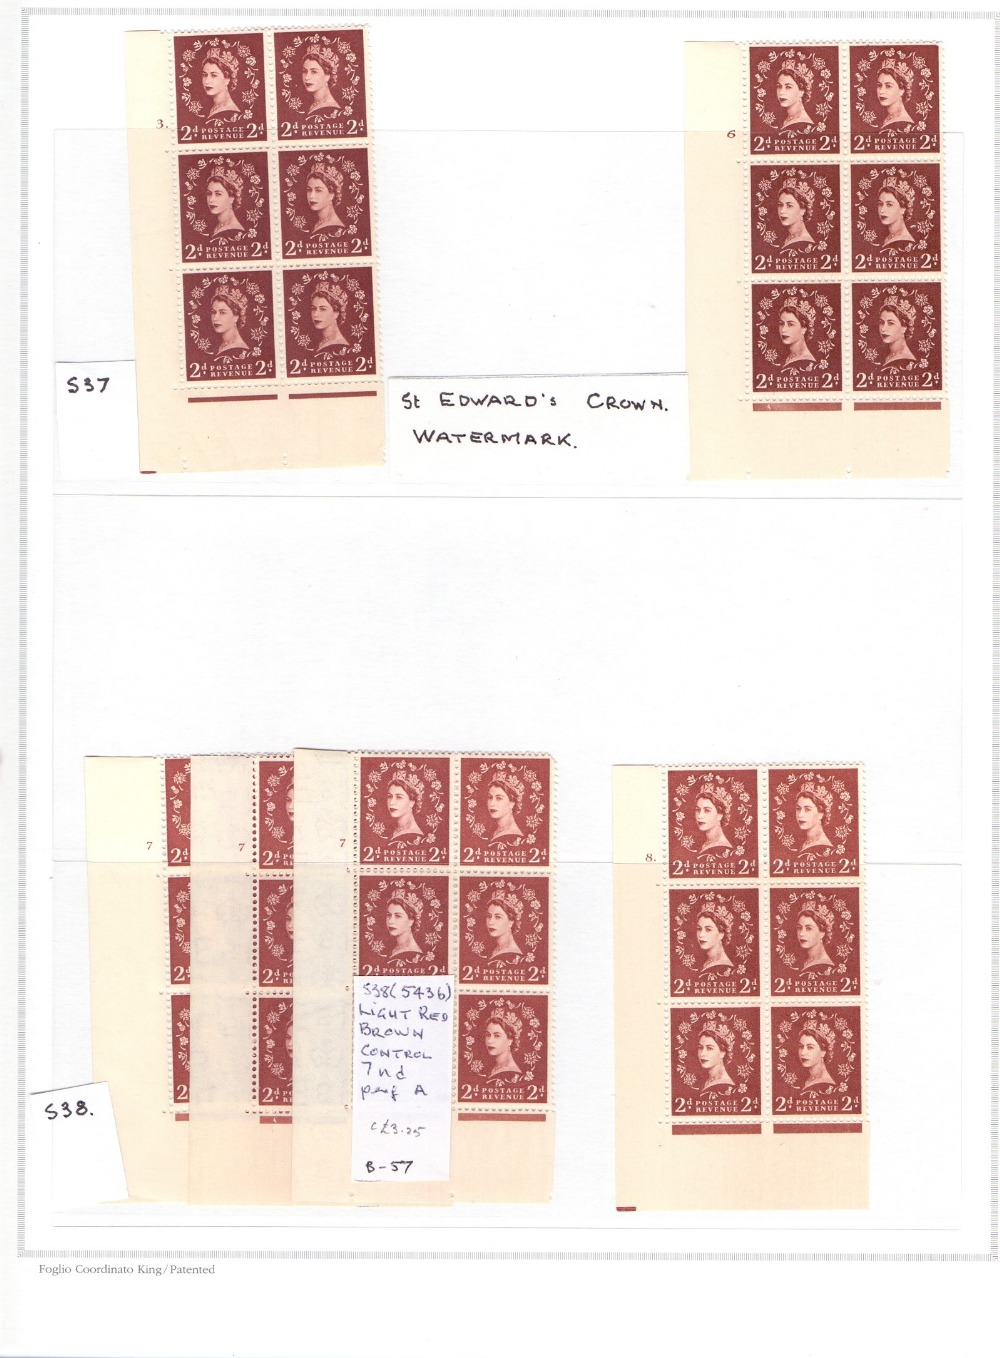 GREAT BRITAIN STAMPS : Wilding Collection, mint cylinder blocks, coils, singles, - Image 5 of 18